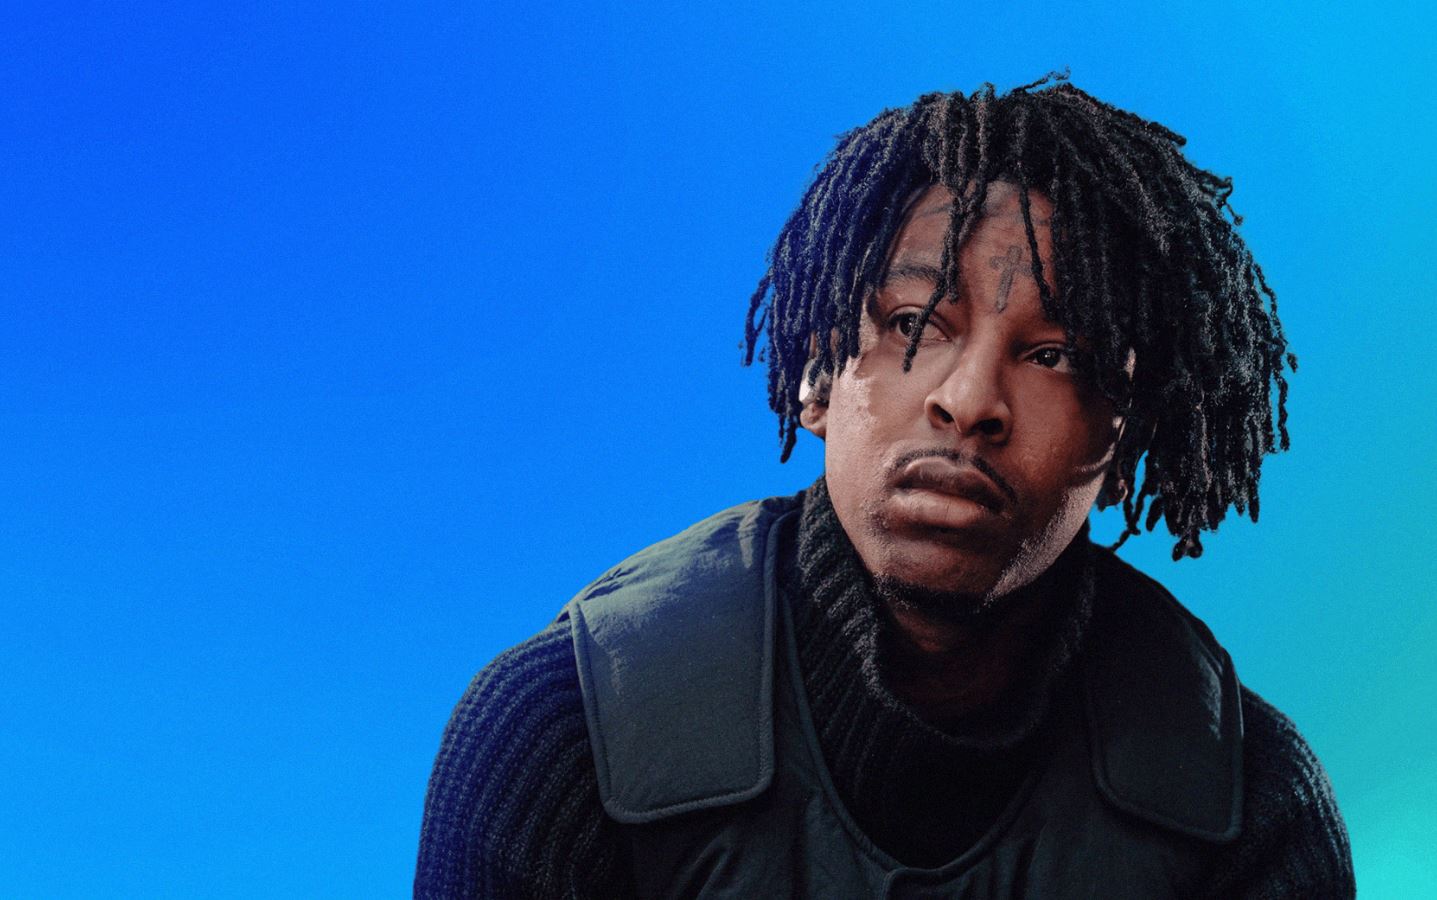 21 Savage cleared to legally travel abroad with plans of international  performance in London